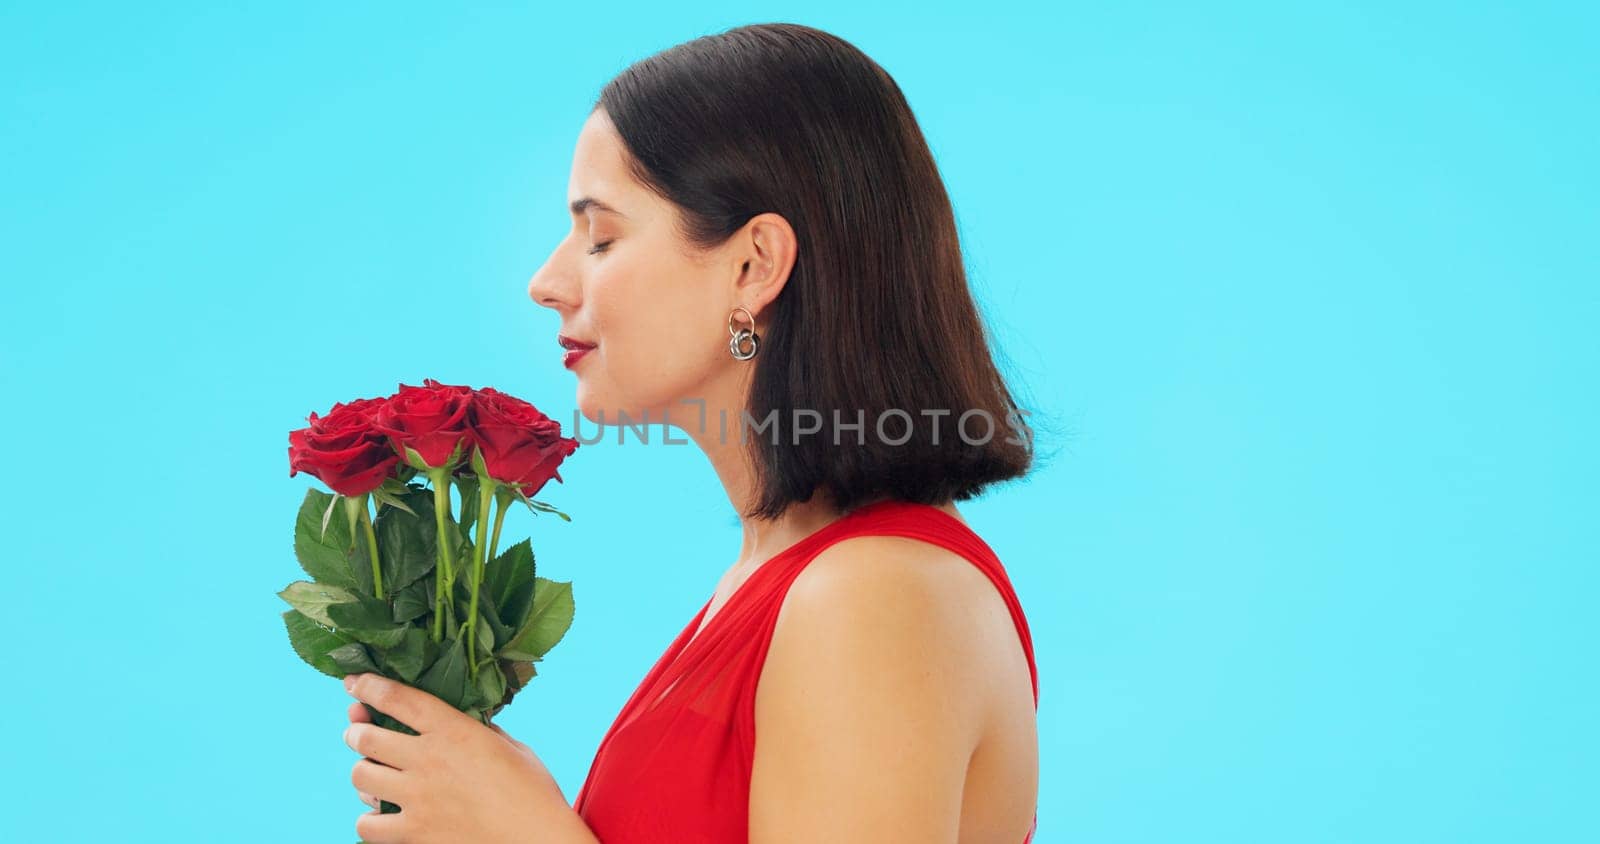 Rose, smell and face of woman in studio with floral bouquet in celebration of love, romance or valentines day. Portrait, scent and girl happy, smile and excited for flowers against blue background.